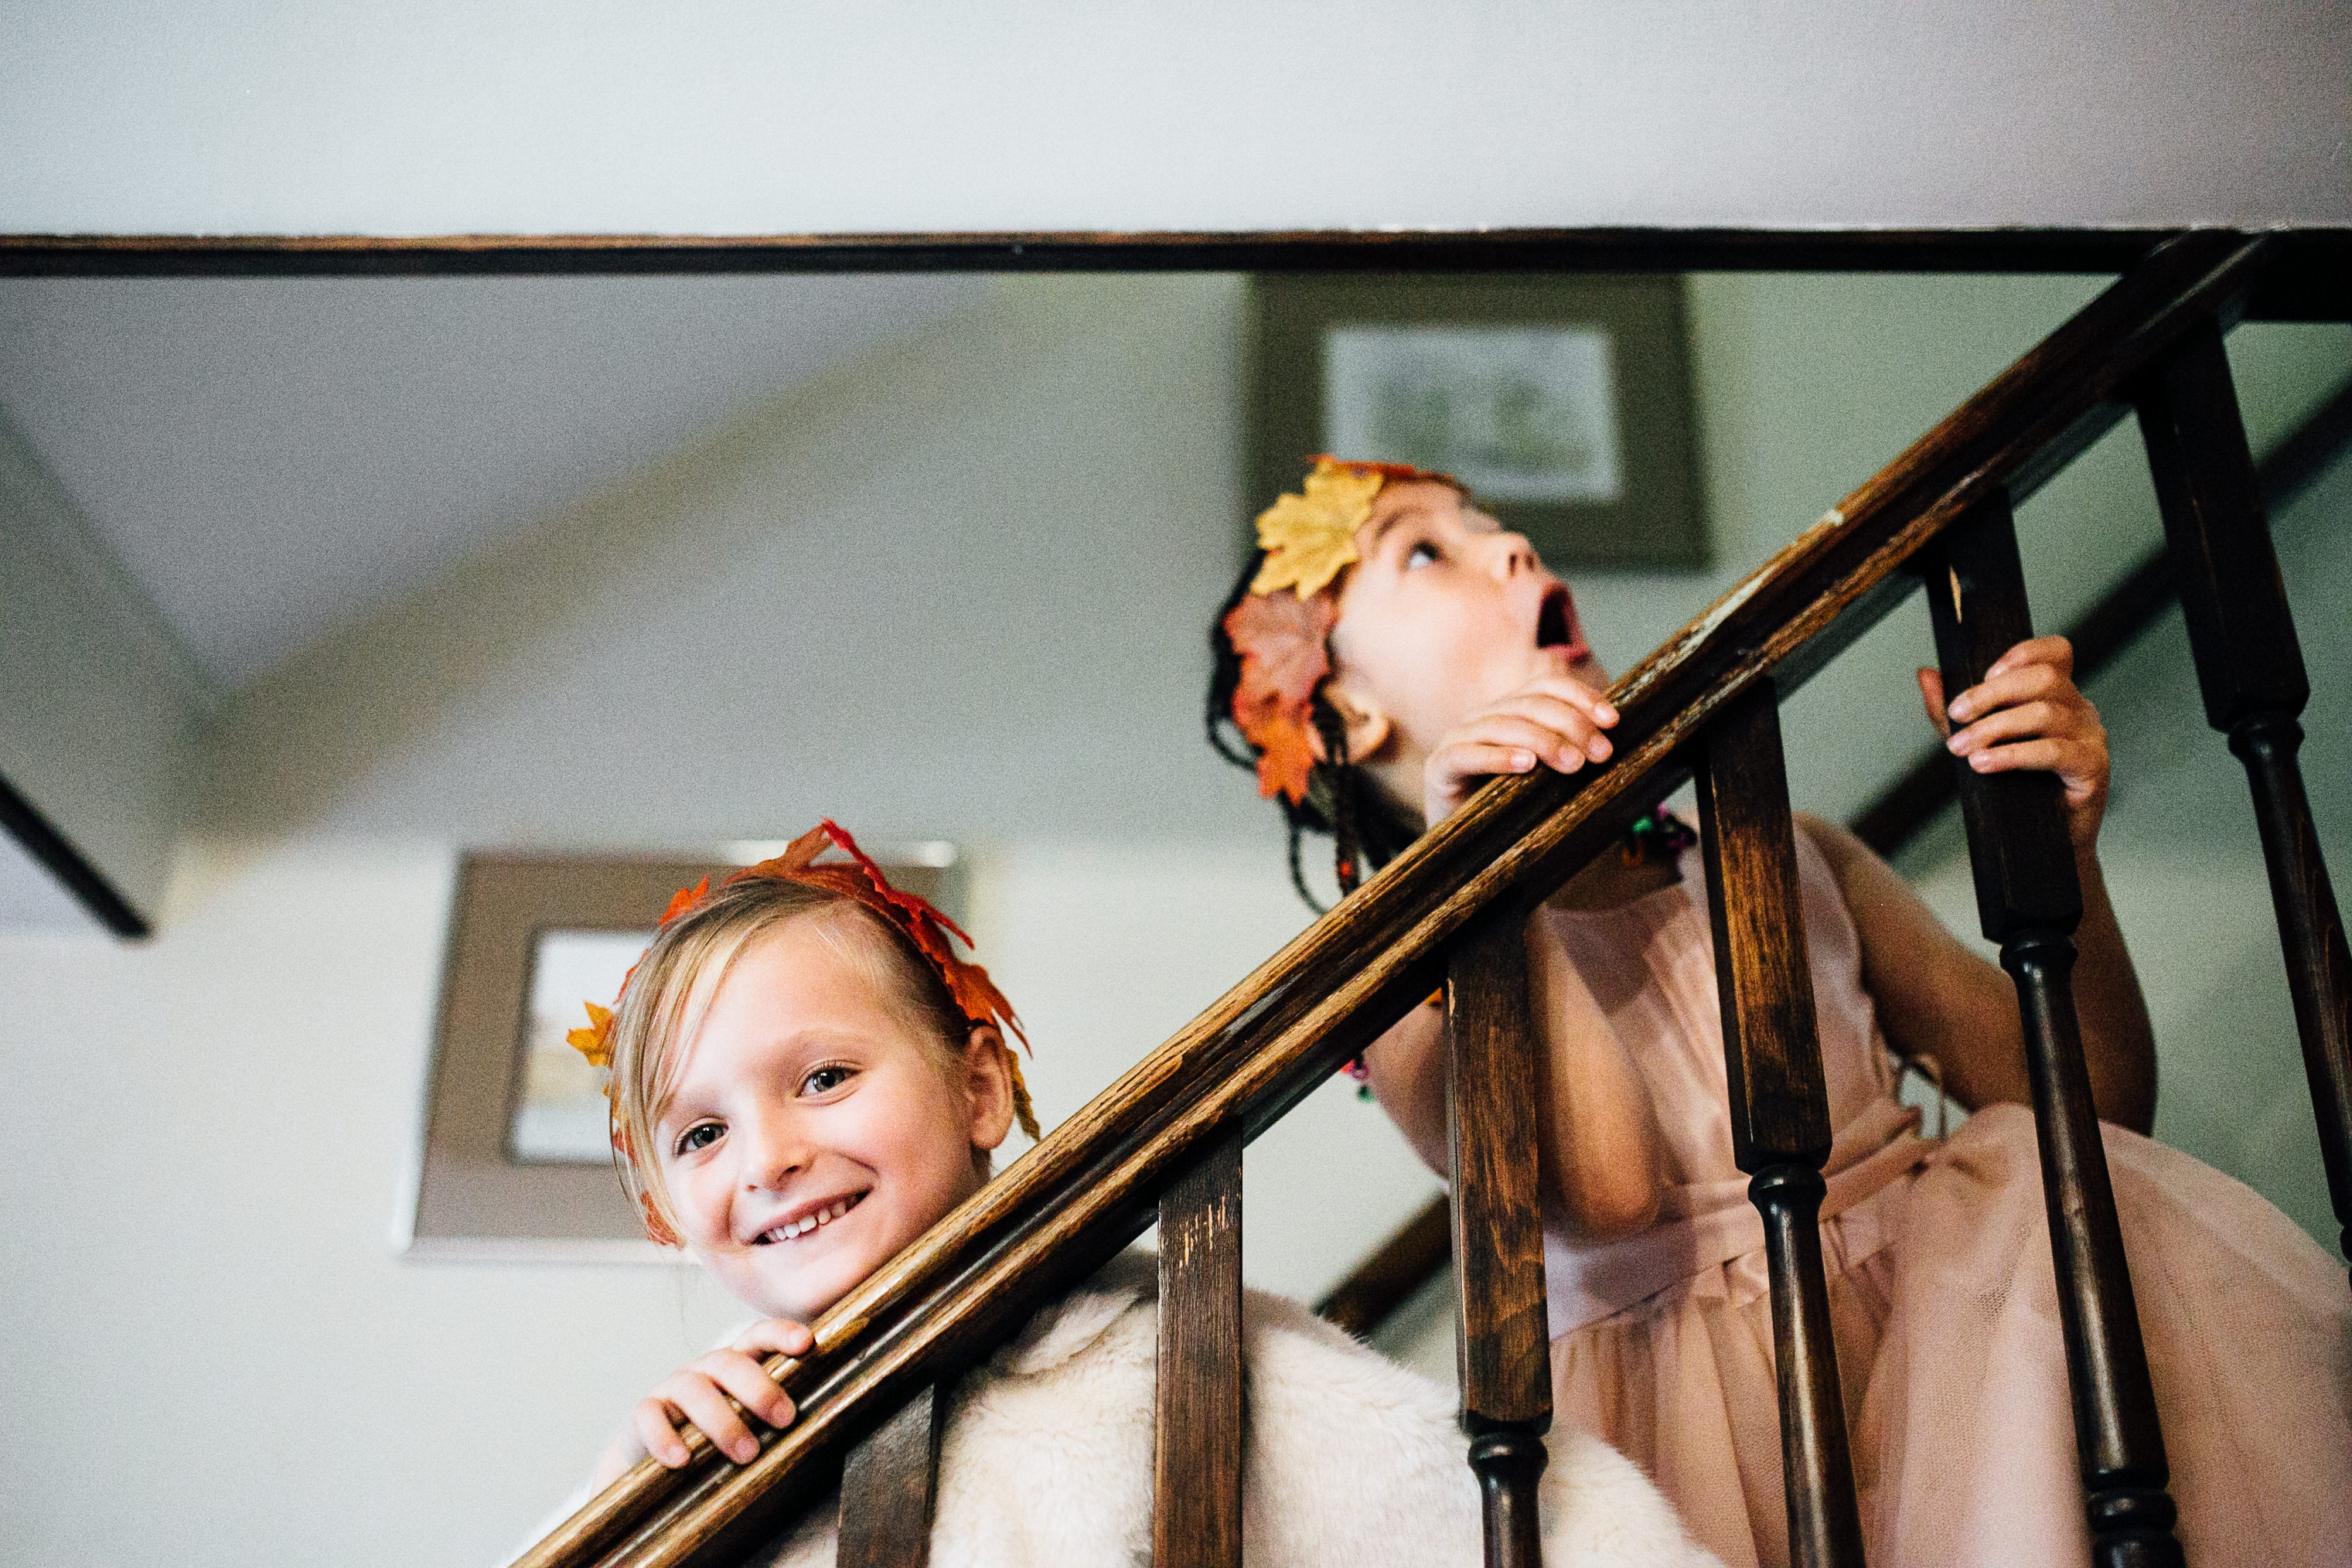 quirky fun autumn wedding in london wedding photographer documentary style prep at home